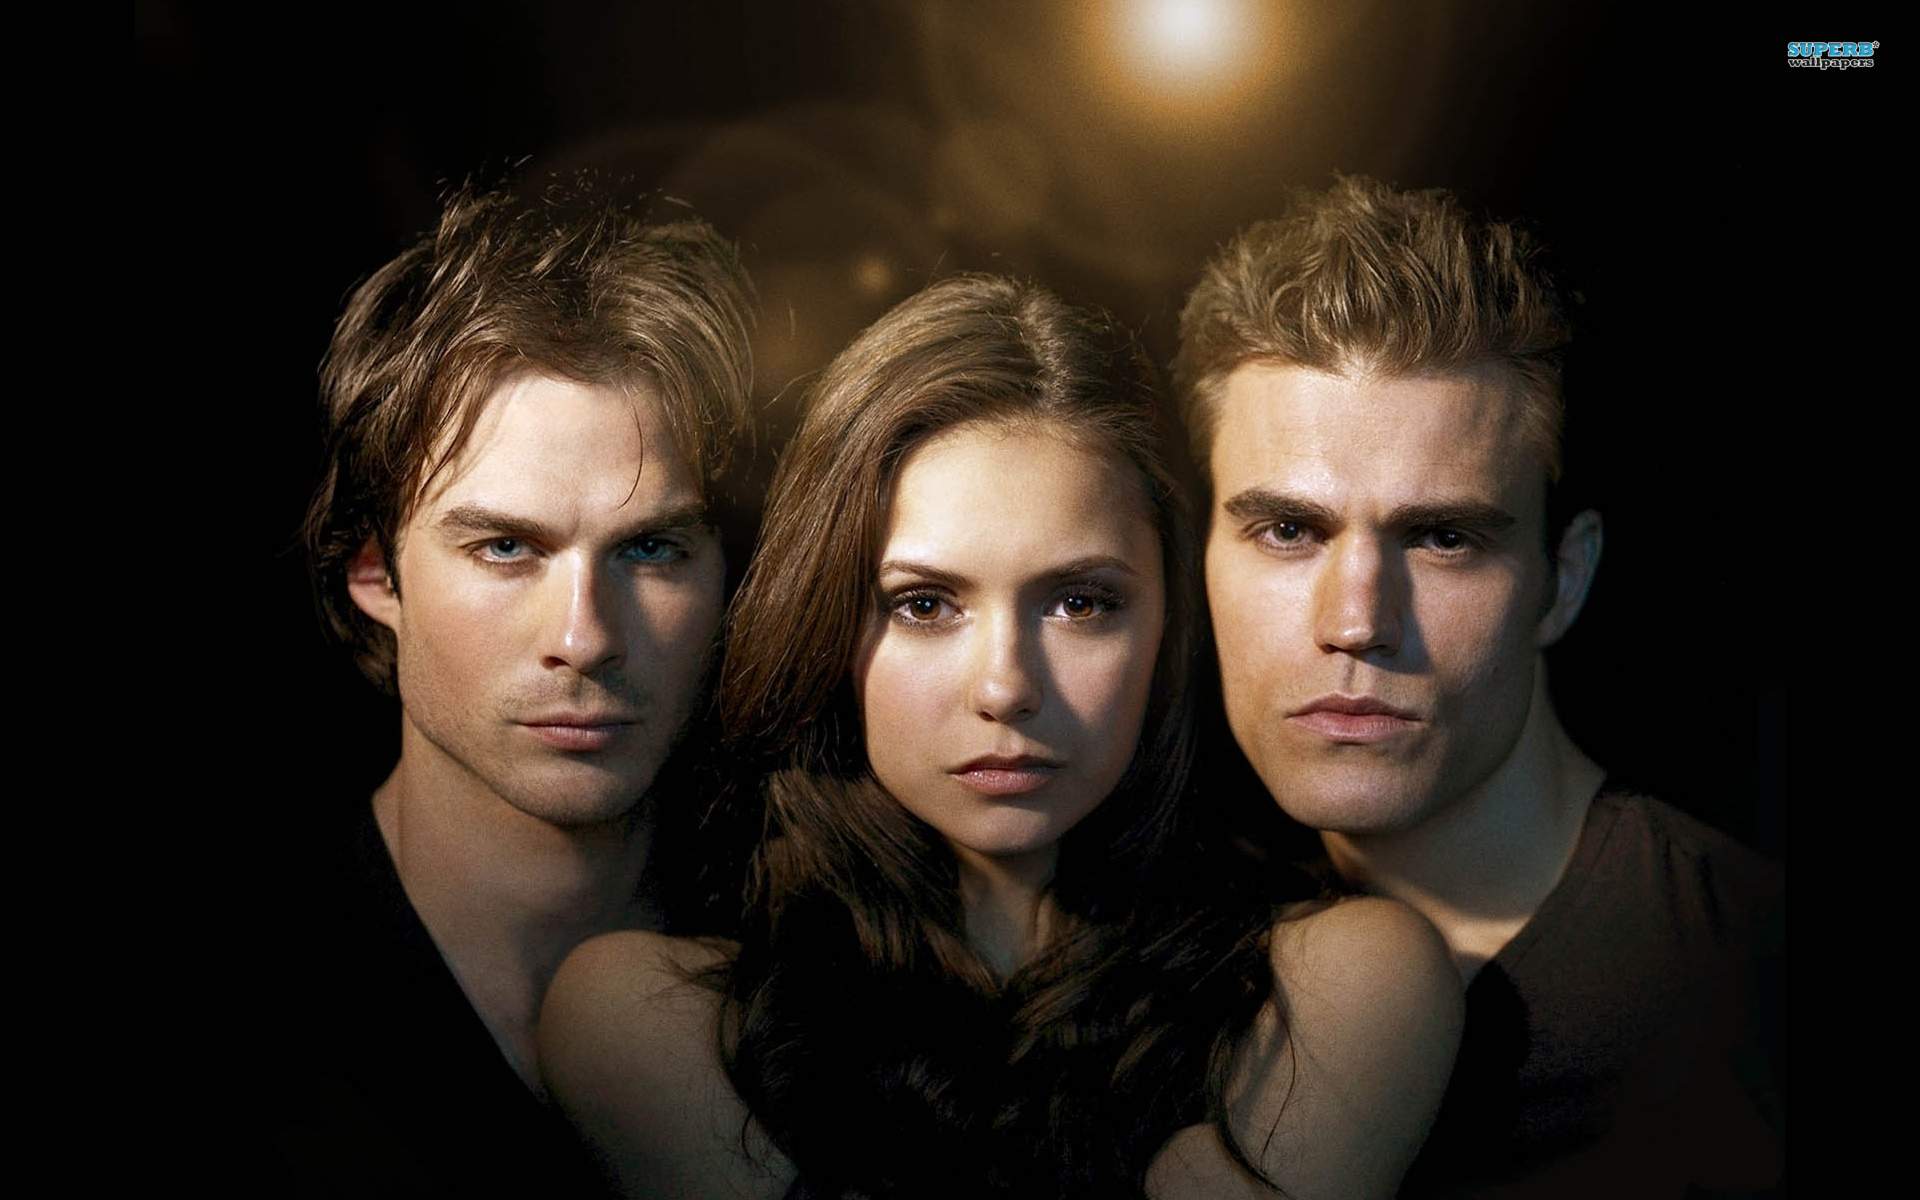 vampire diaries wallpaper,face,head,beauty,nose,flash photography